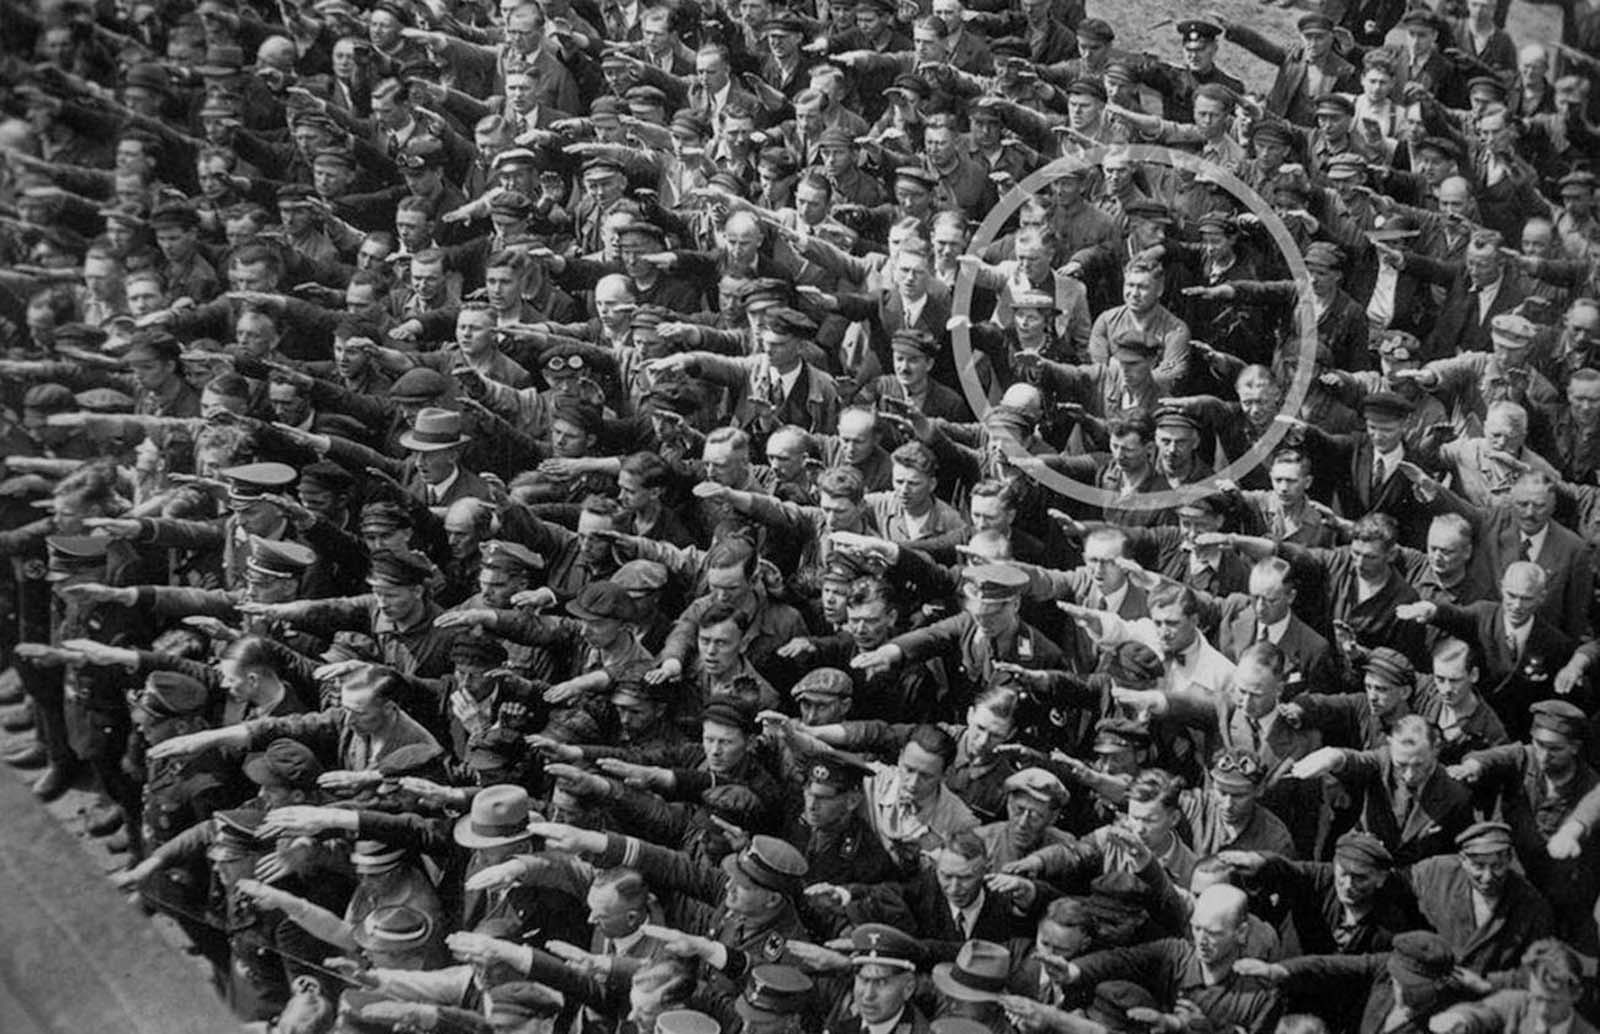 August Landmesser, the man who folded his arms.